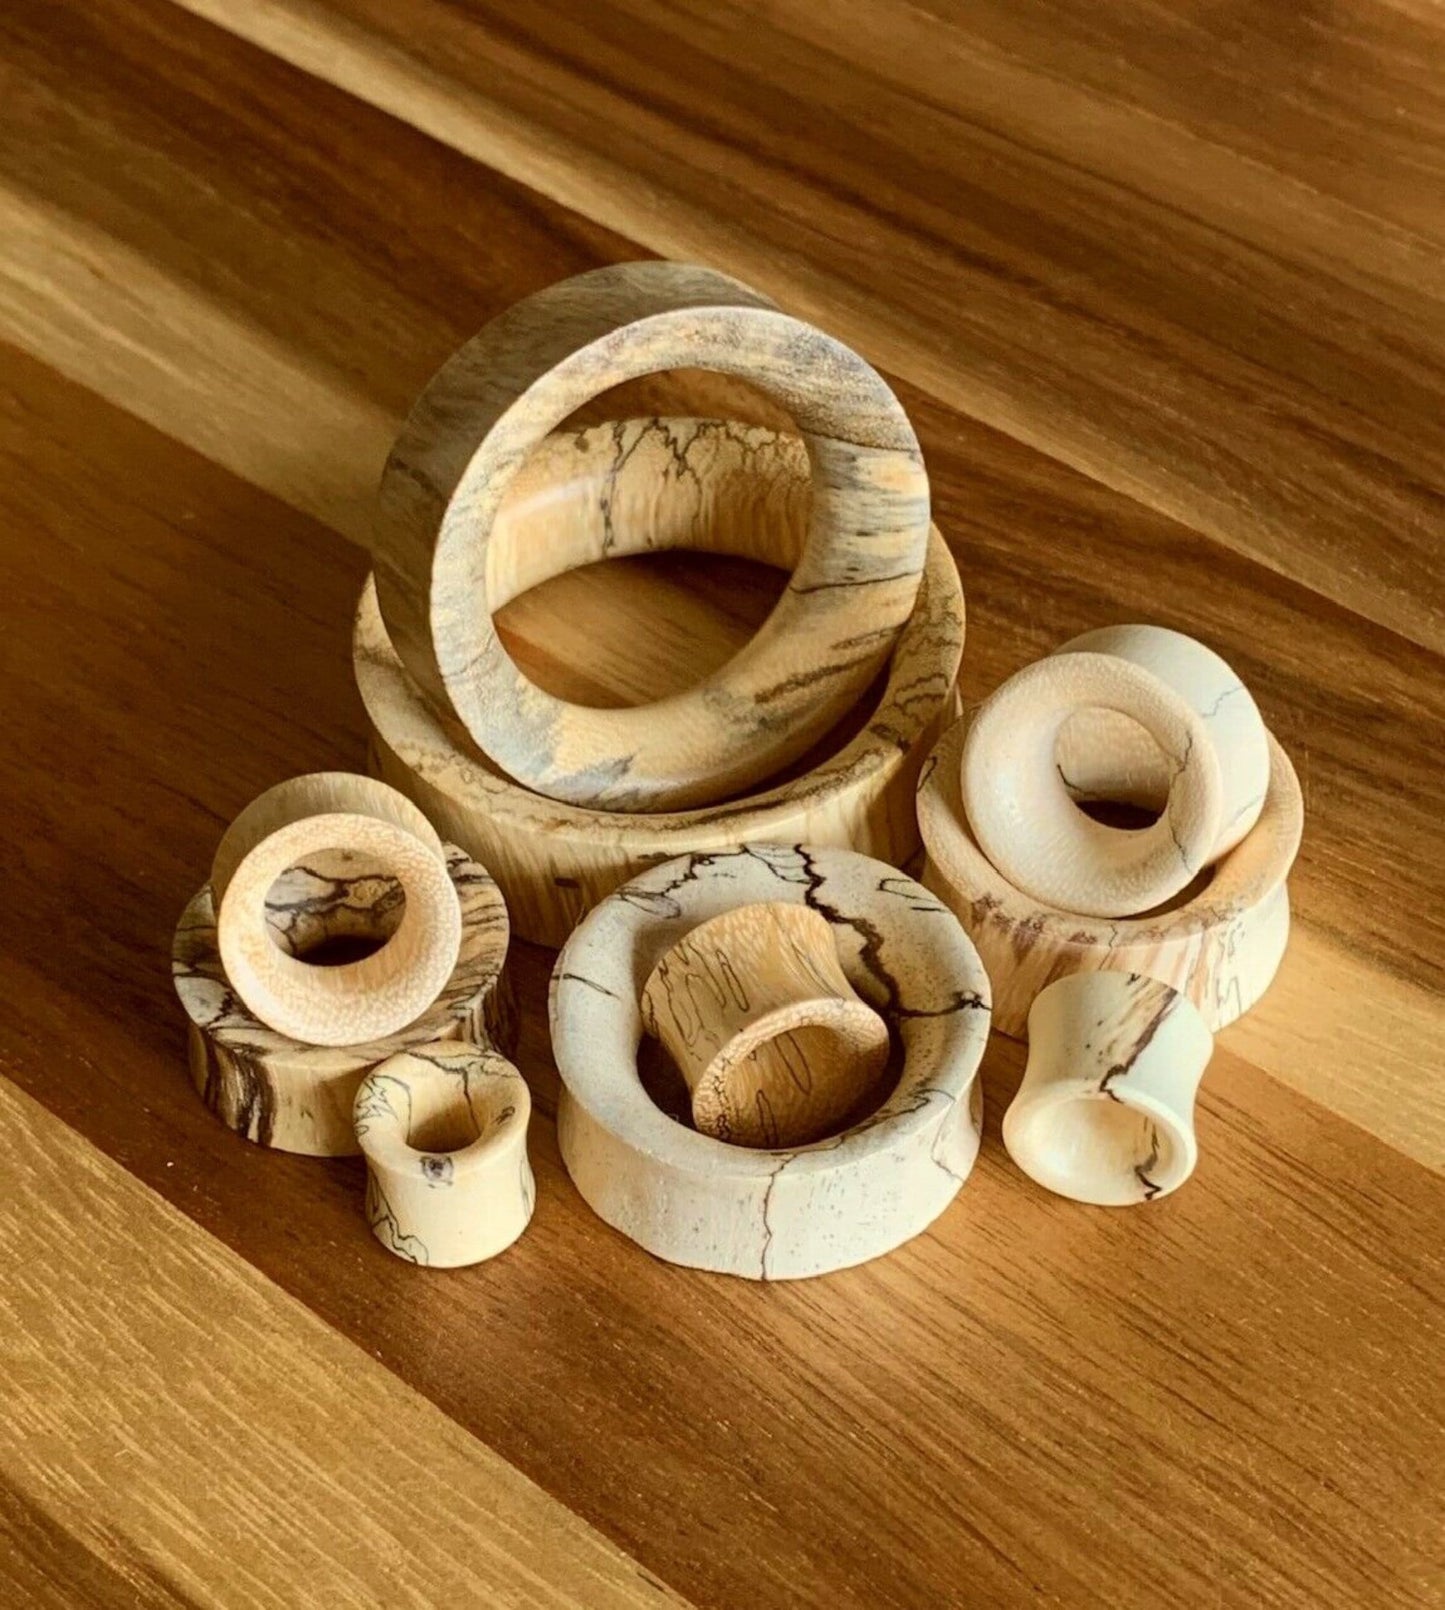 PAIR of Stunning Organic Tamarind Wood Tunnel/Plugs - Gauges 0g (8mm) up to 2" (50mm) available!